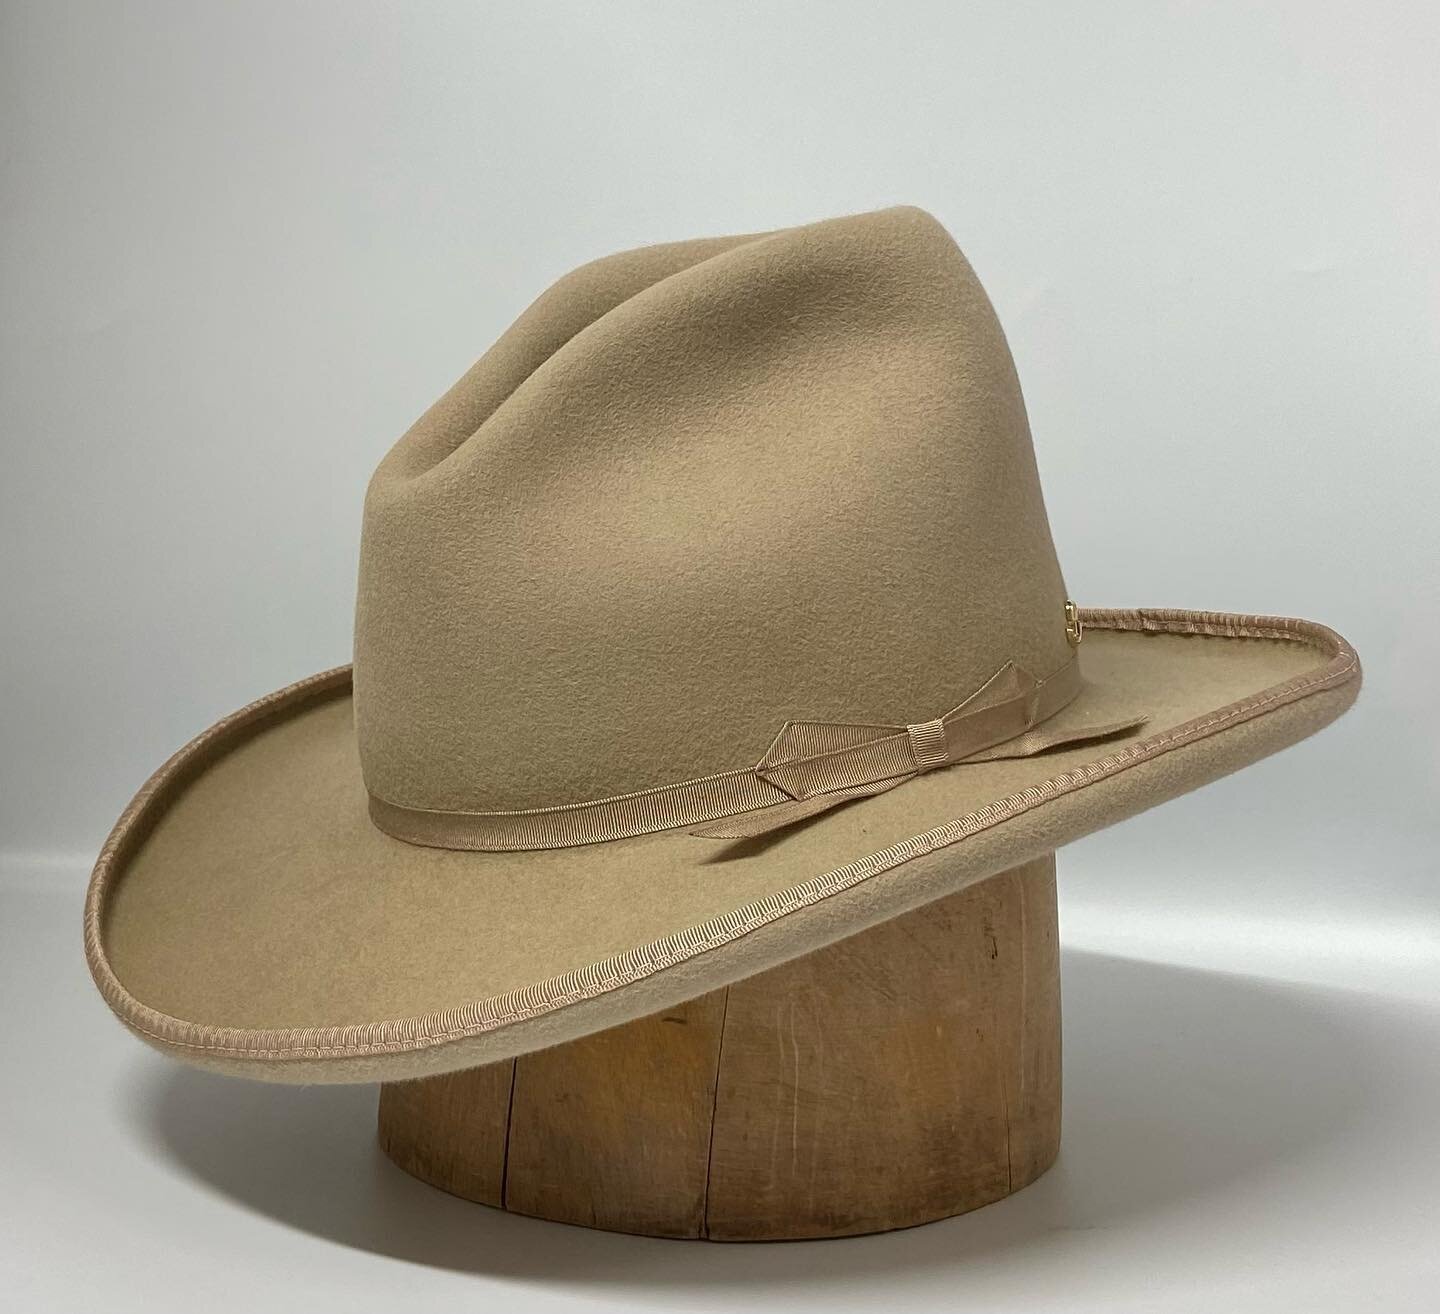 Once upon a time, this was a staple of the west. 

#bowmanhatco